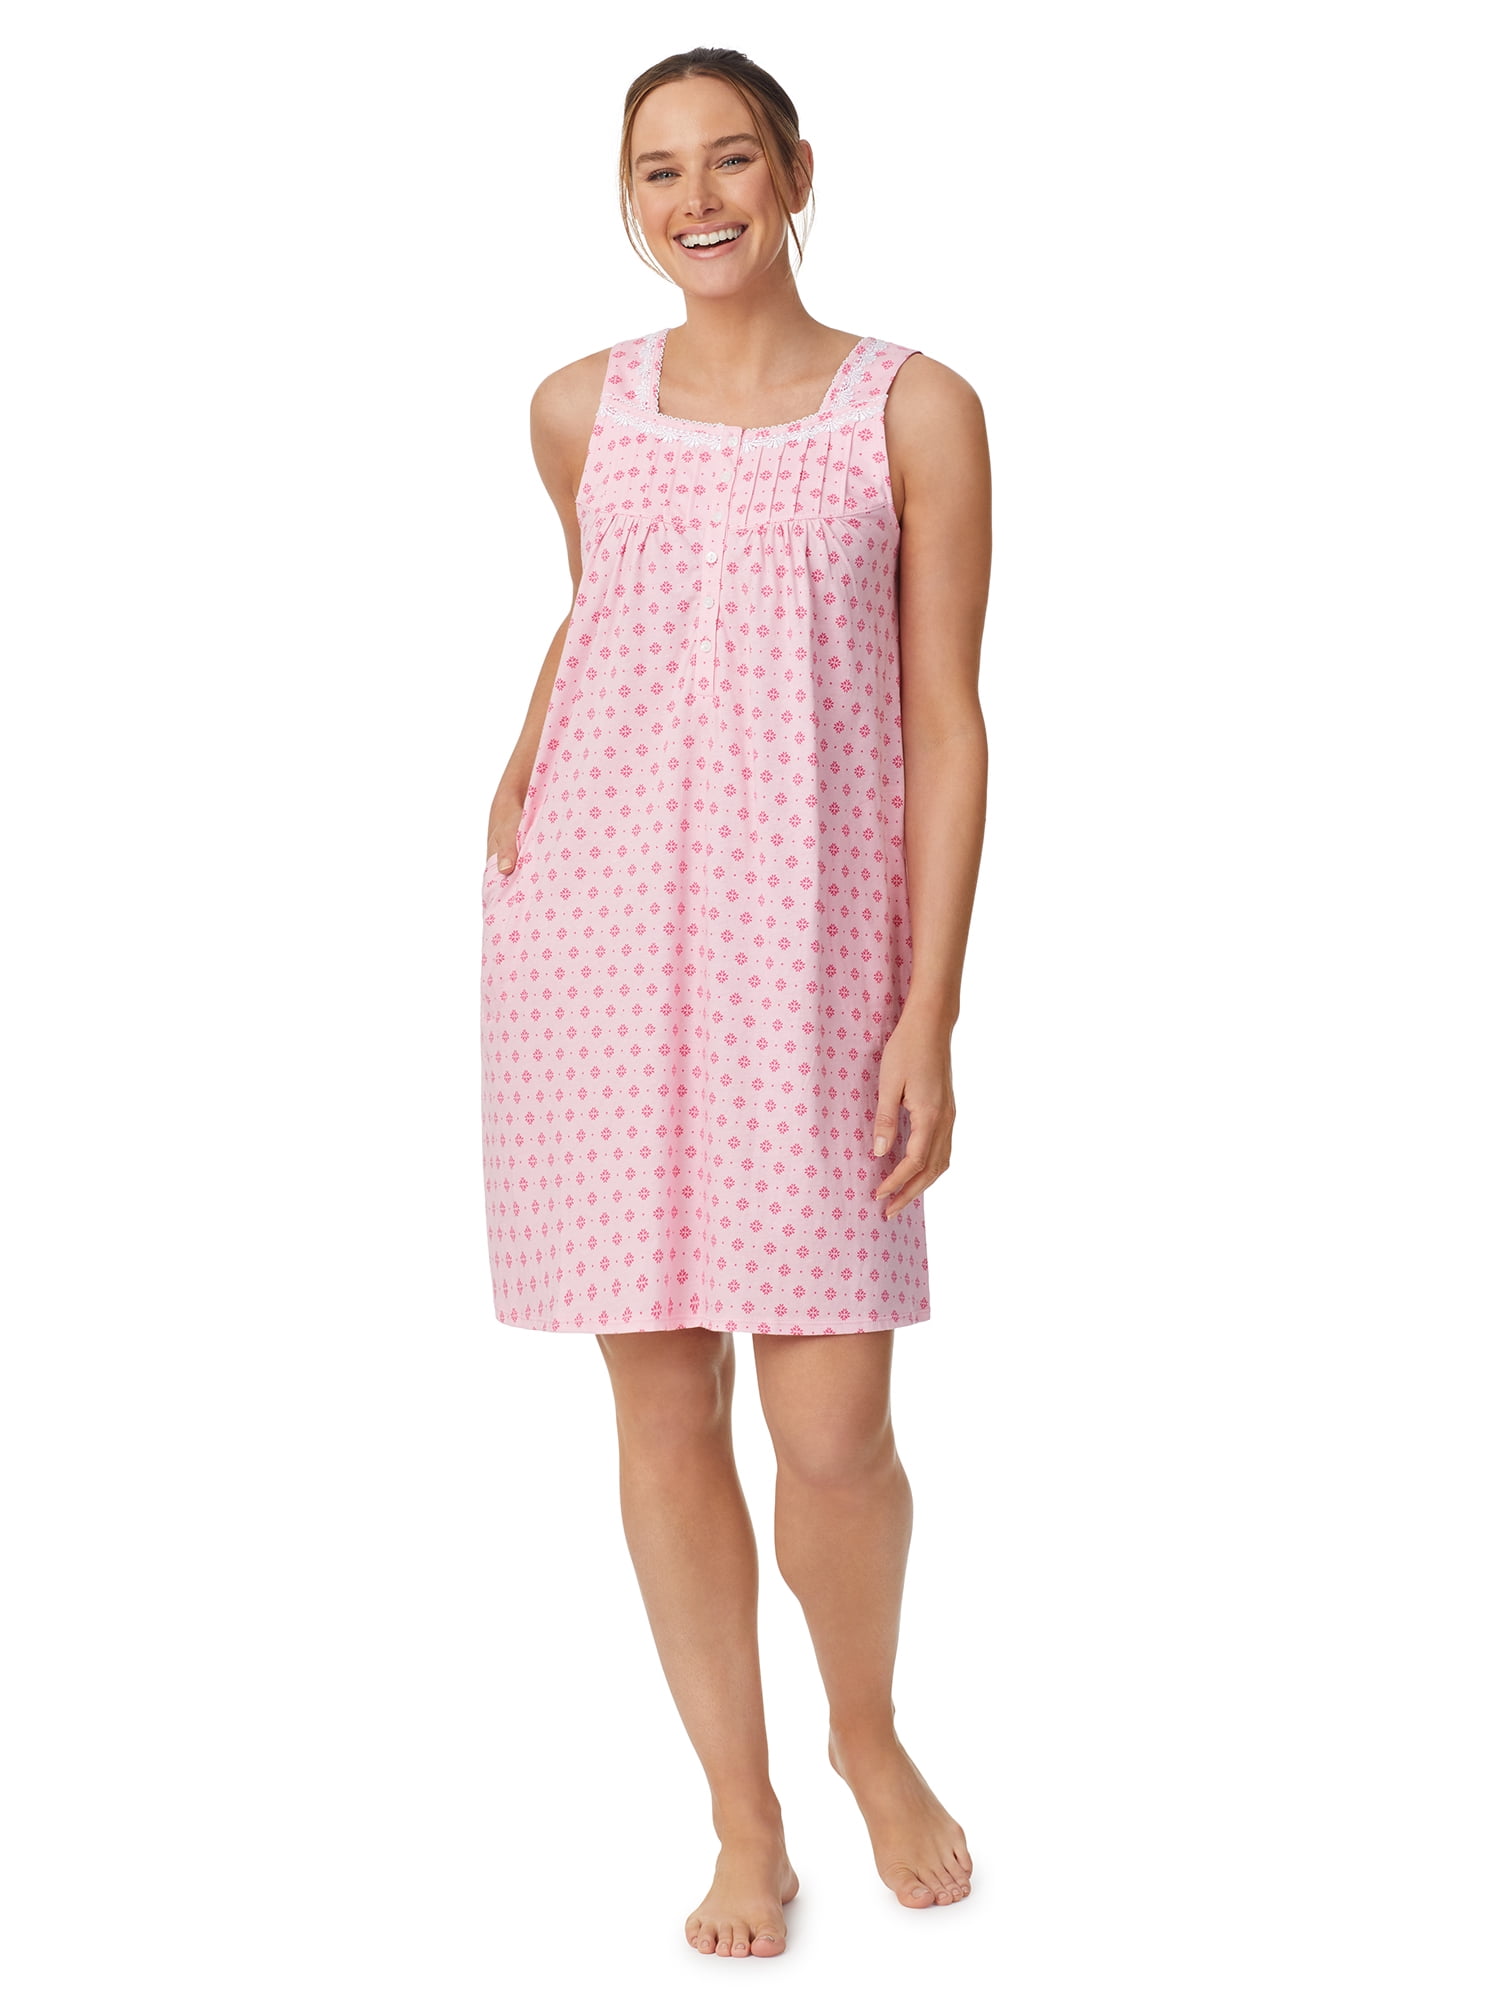 All-Cotton Nightgown with Pockets - Short Sleeve Nightdress